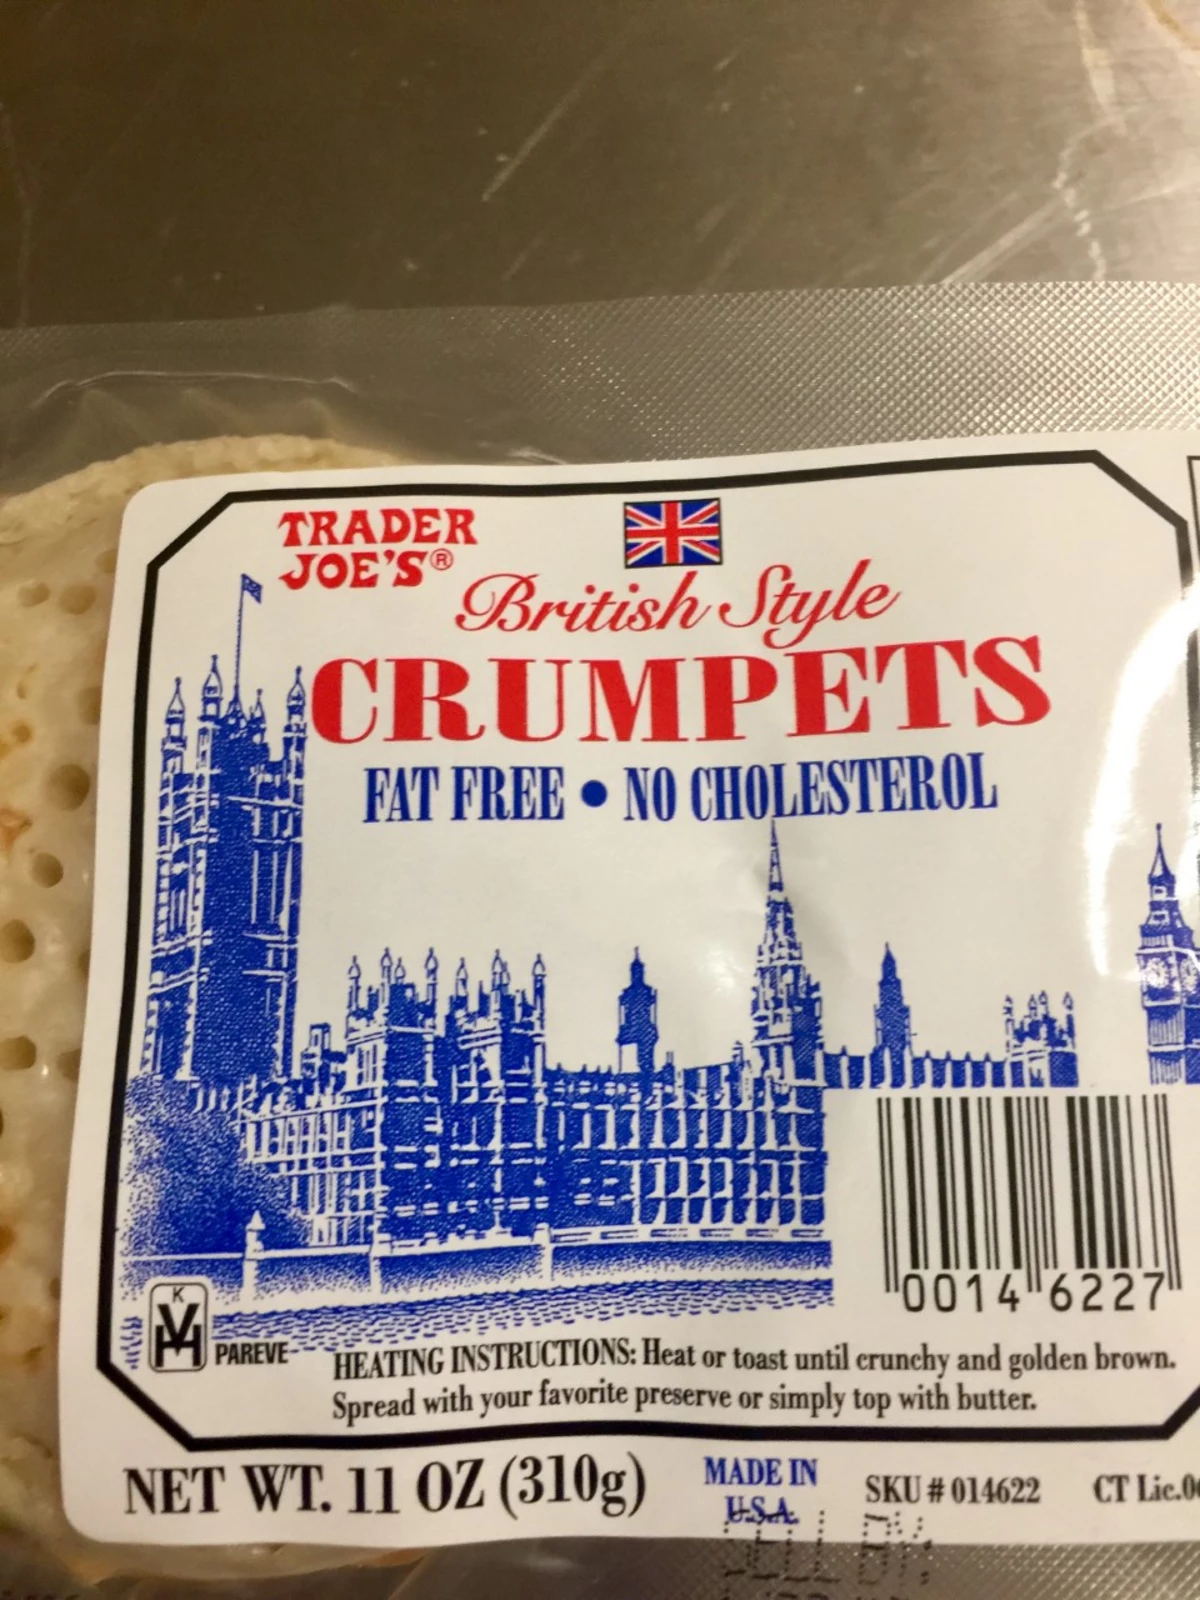 My Quest For Fresh Crumpets Across Connecticut